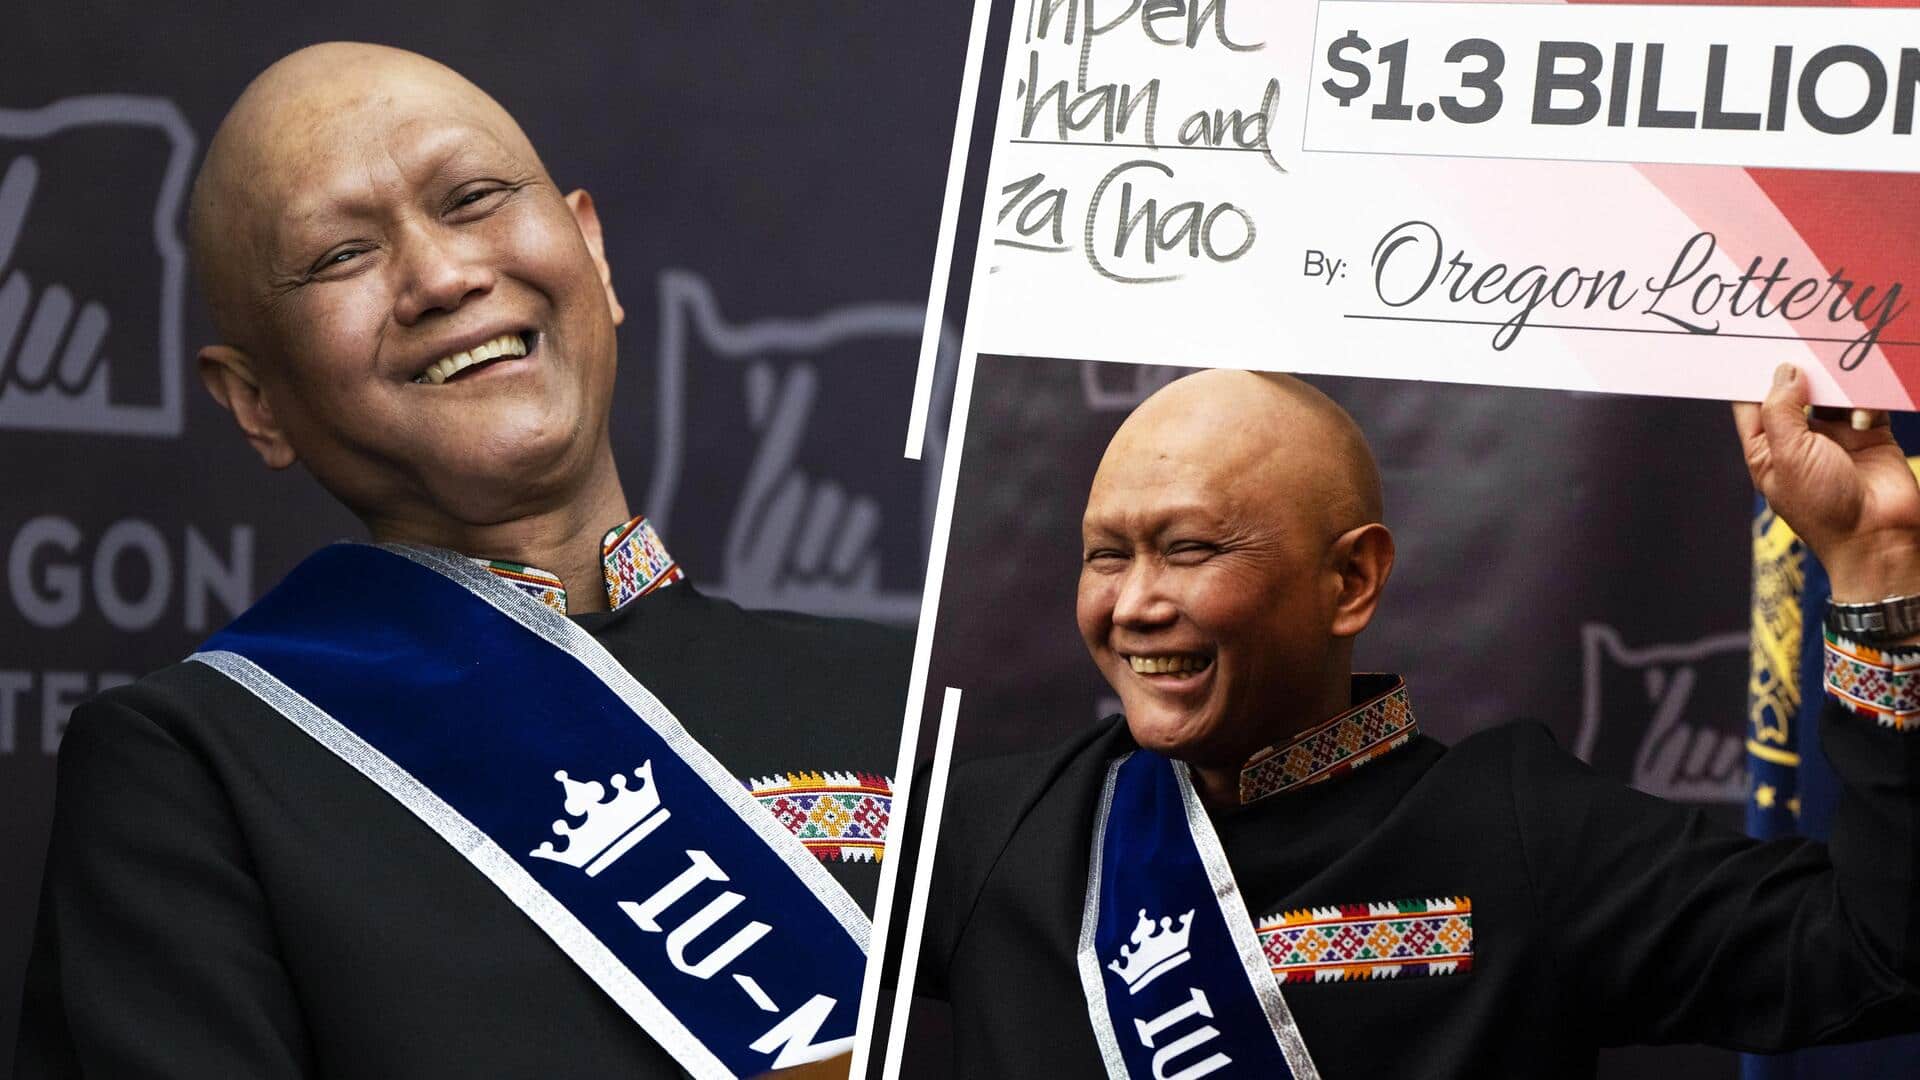 Immigrant cancer patient from Laos wins record-breaking $1.3B Powerball jackpot